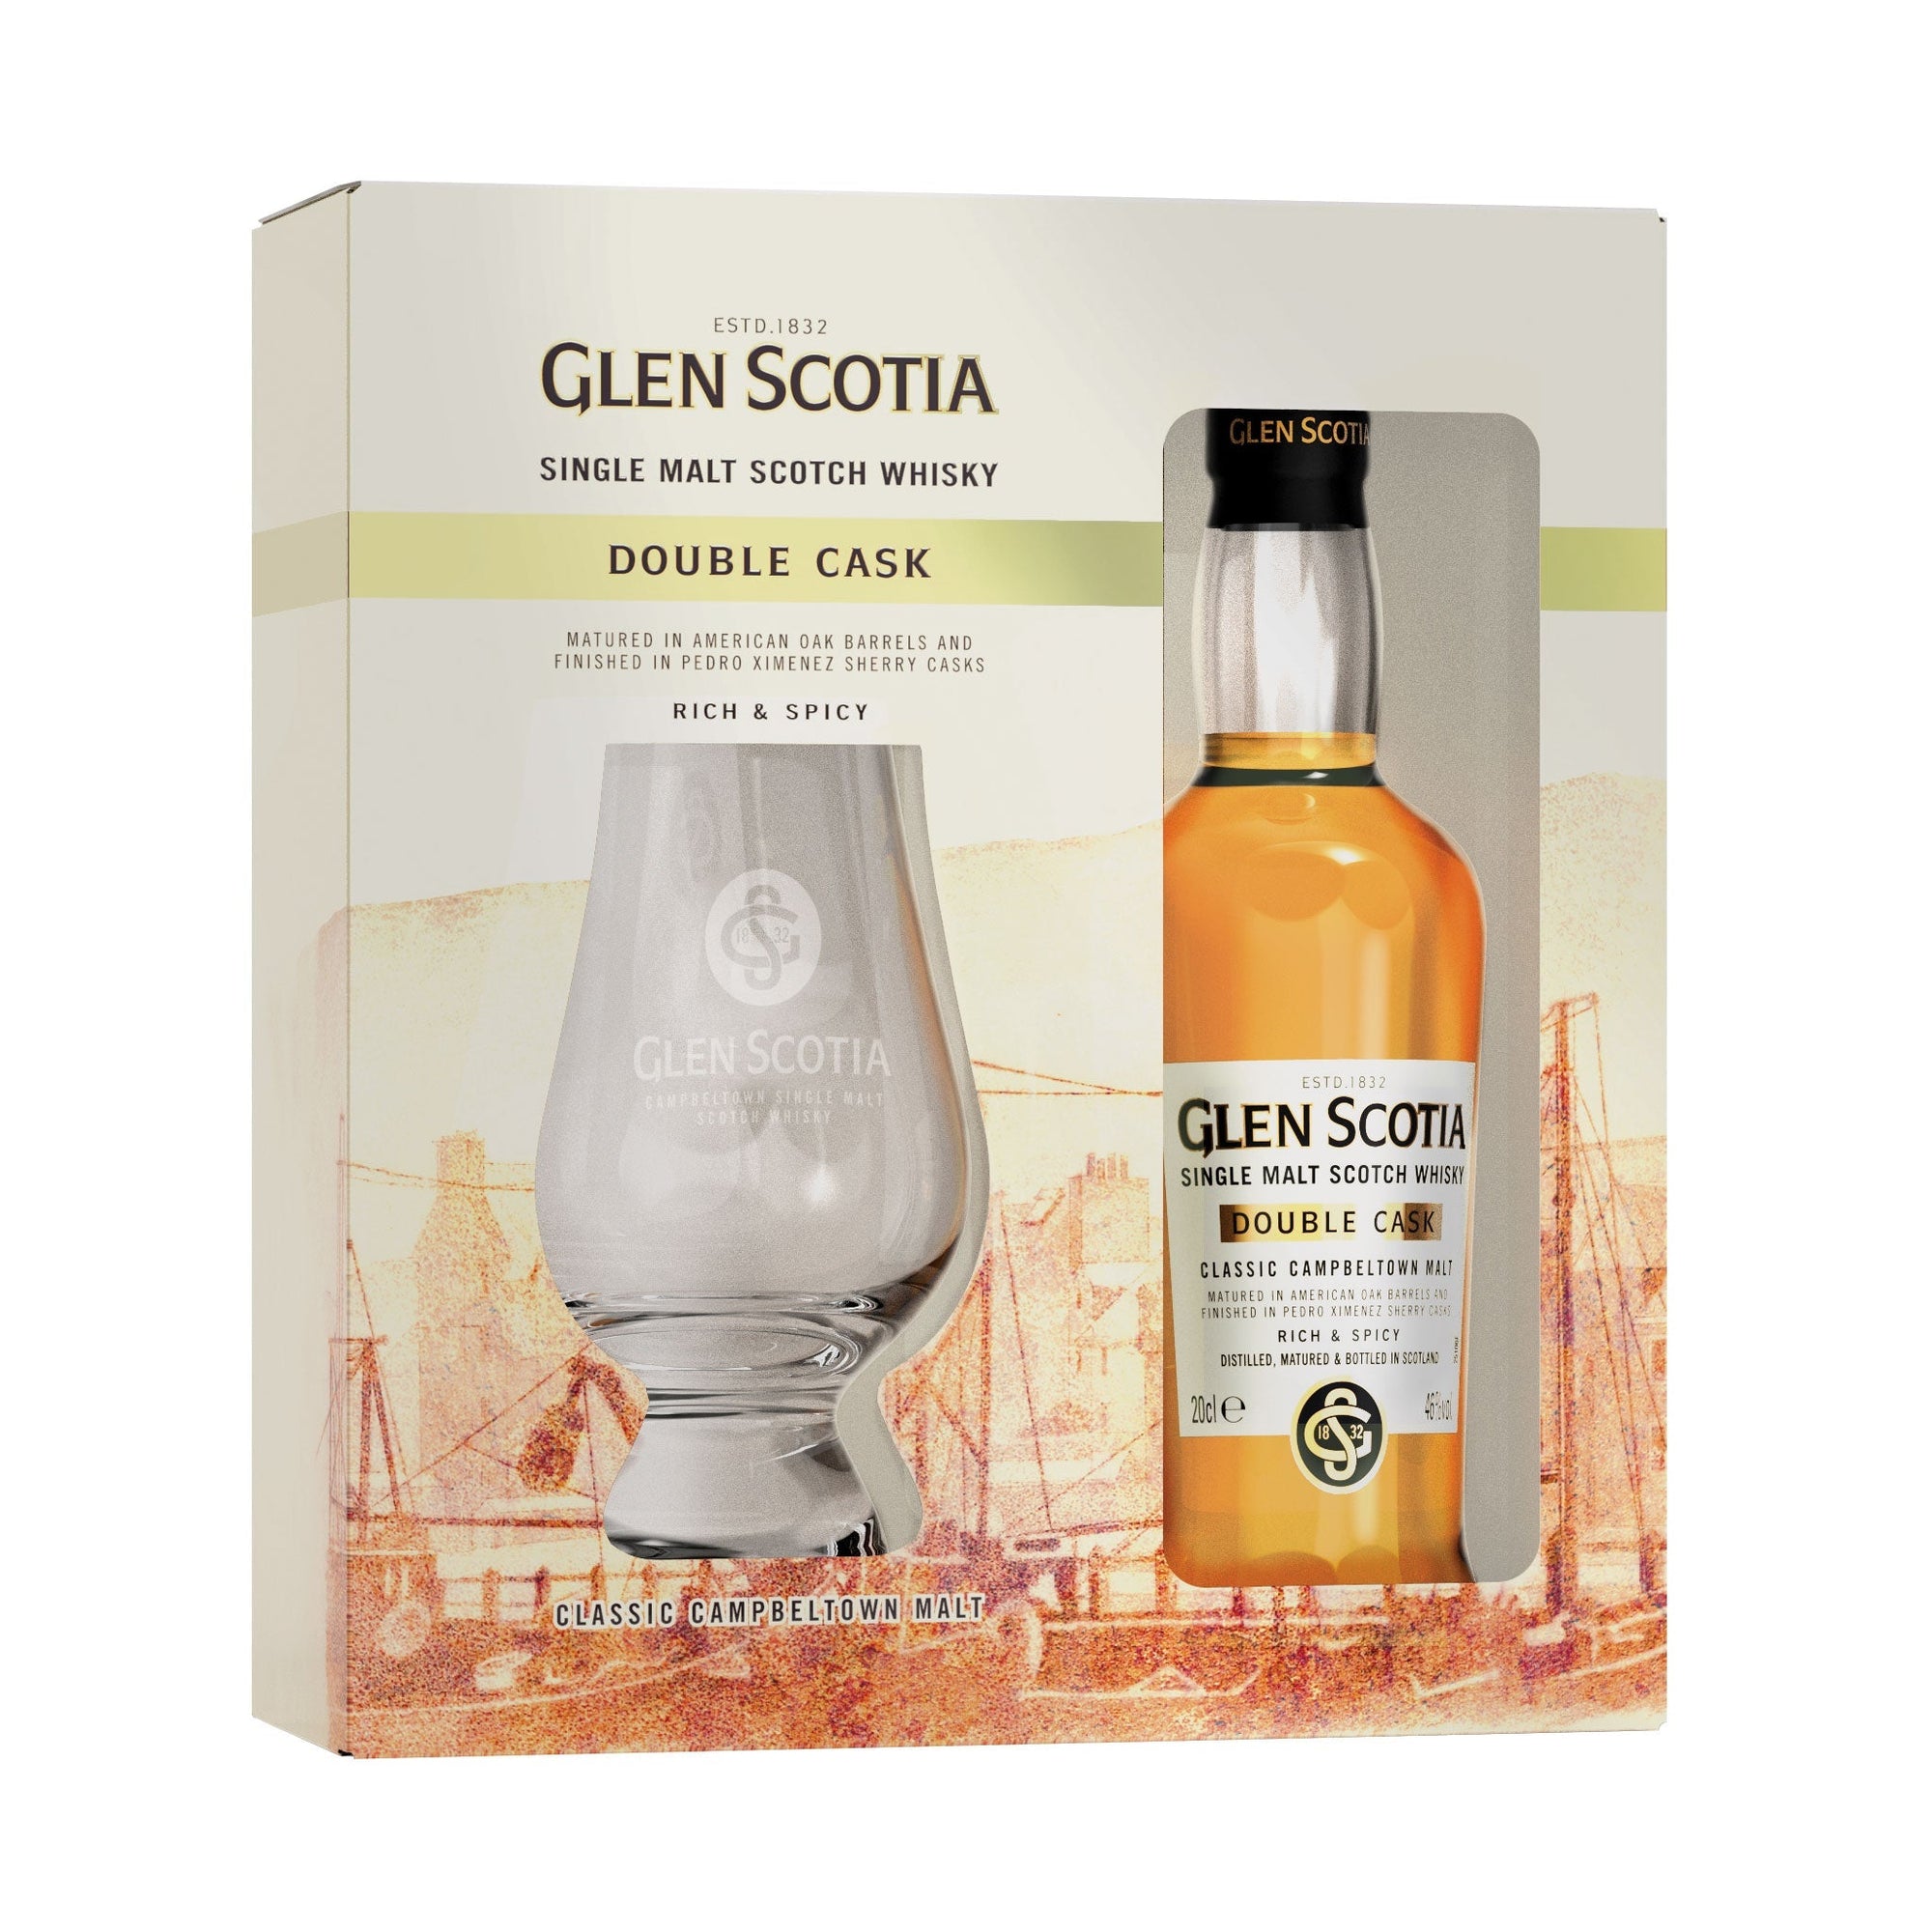 Whisky and Glass Gift Set - Loch Lomond Group